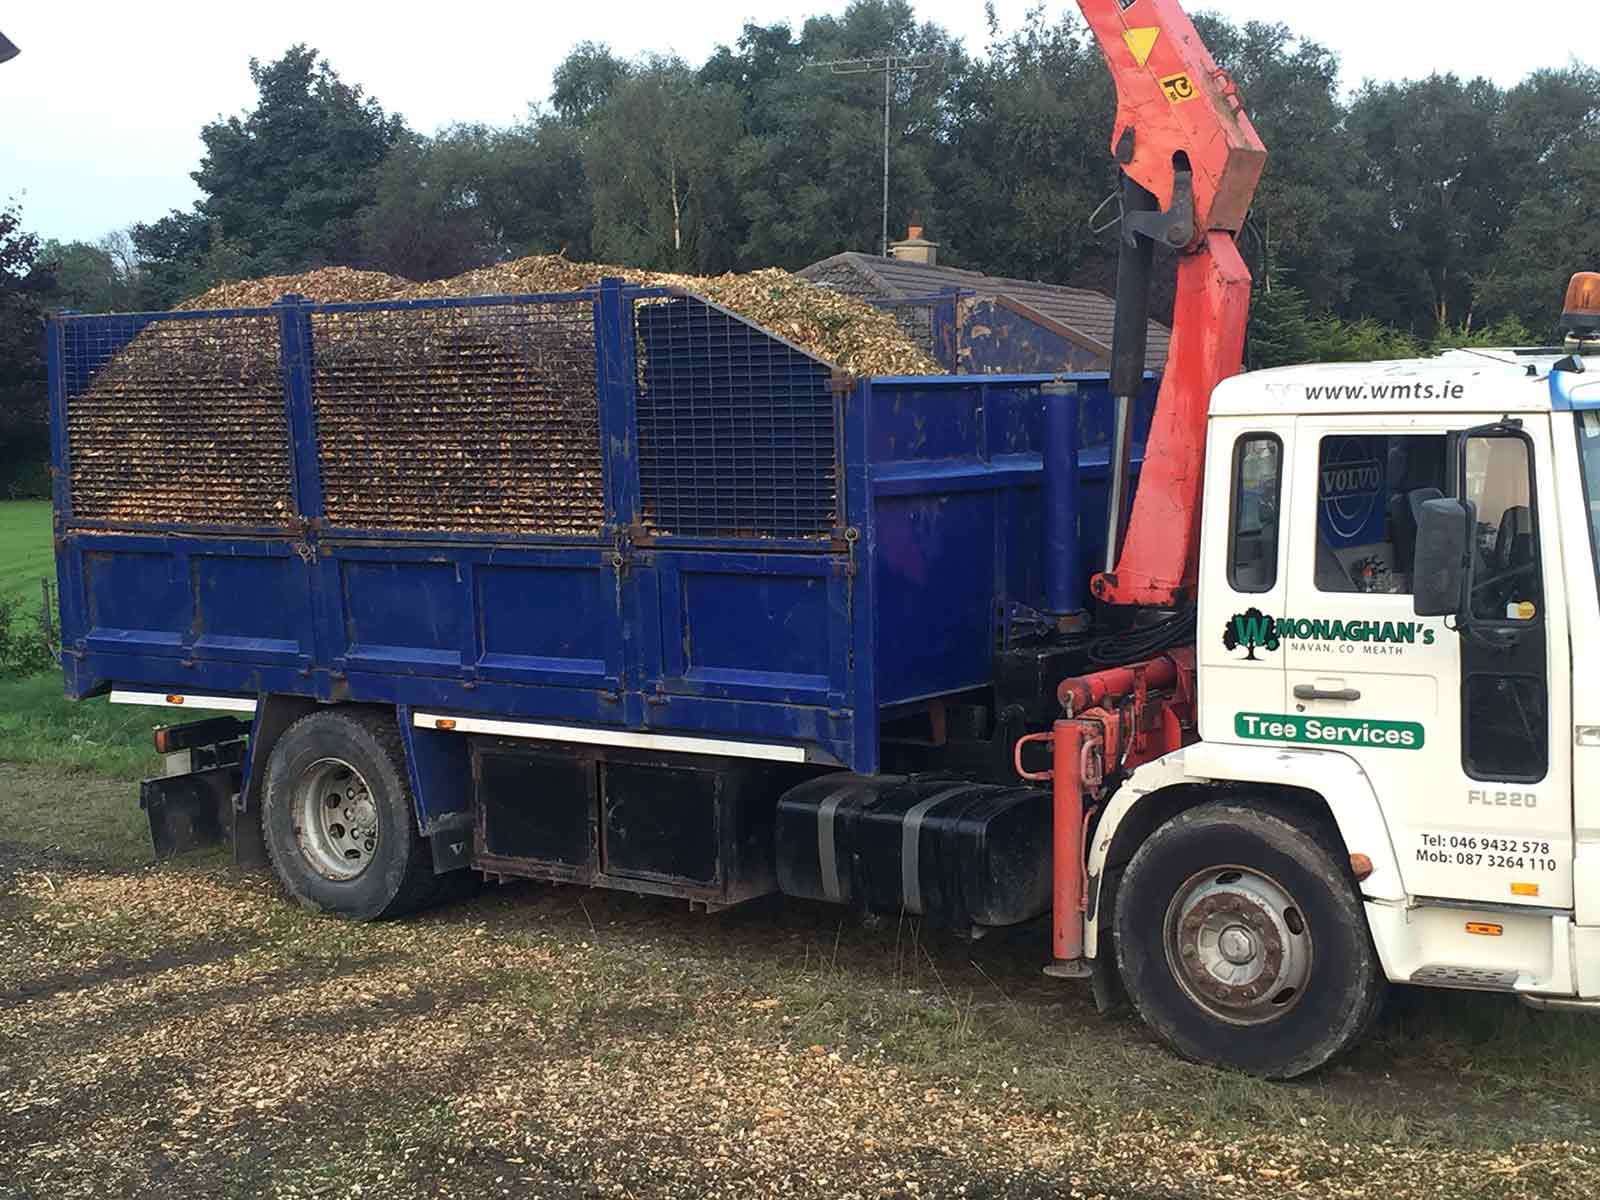 Firewood and wood chip for sale in Meath and Dublin